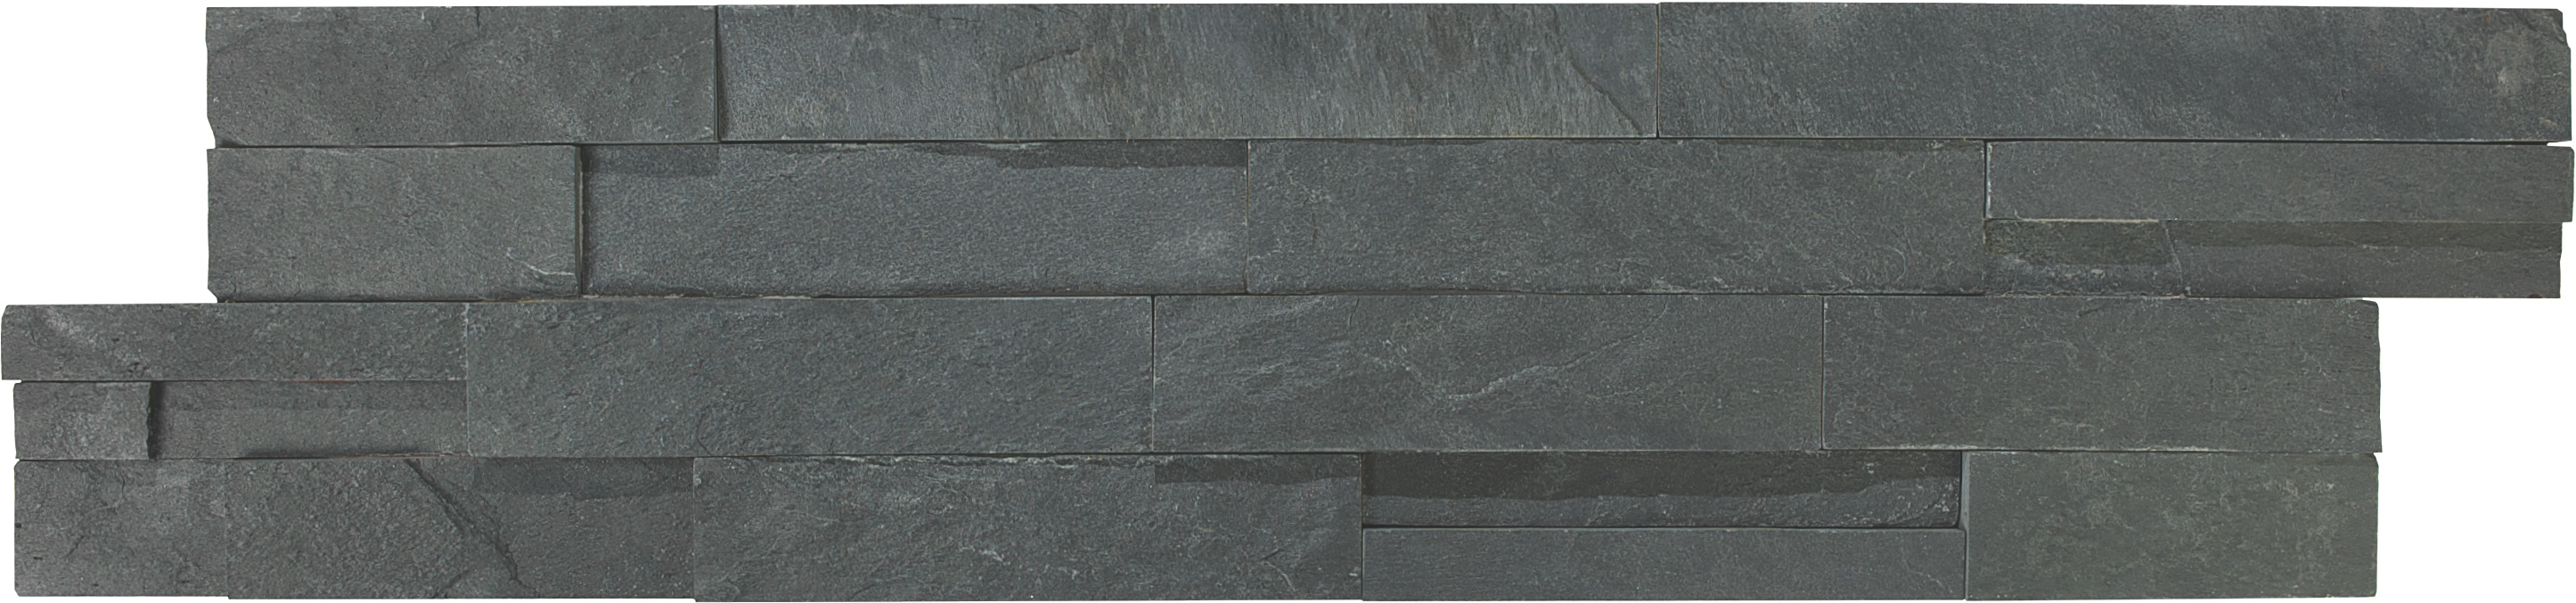 slate carbon pattern natural stone field tile from ledger stone anatolia collection distributed by surface group international split face finish straight edge edge 6x24 rectangle shape